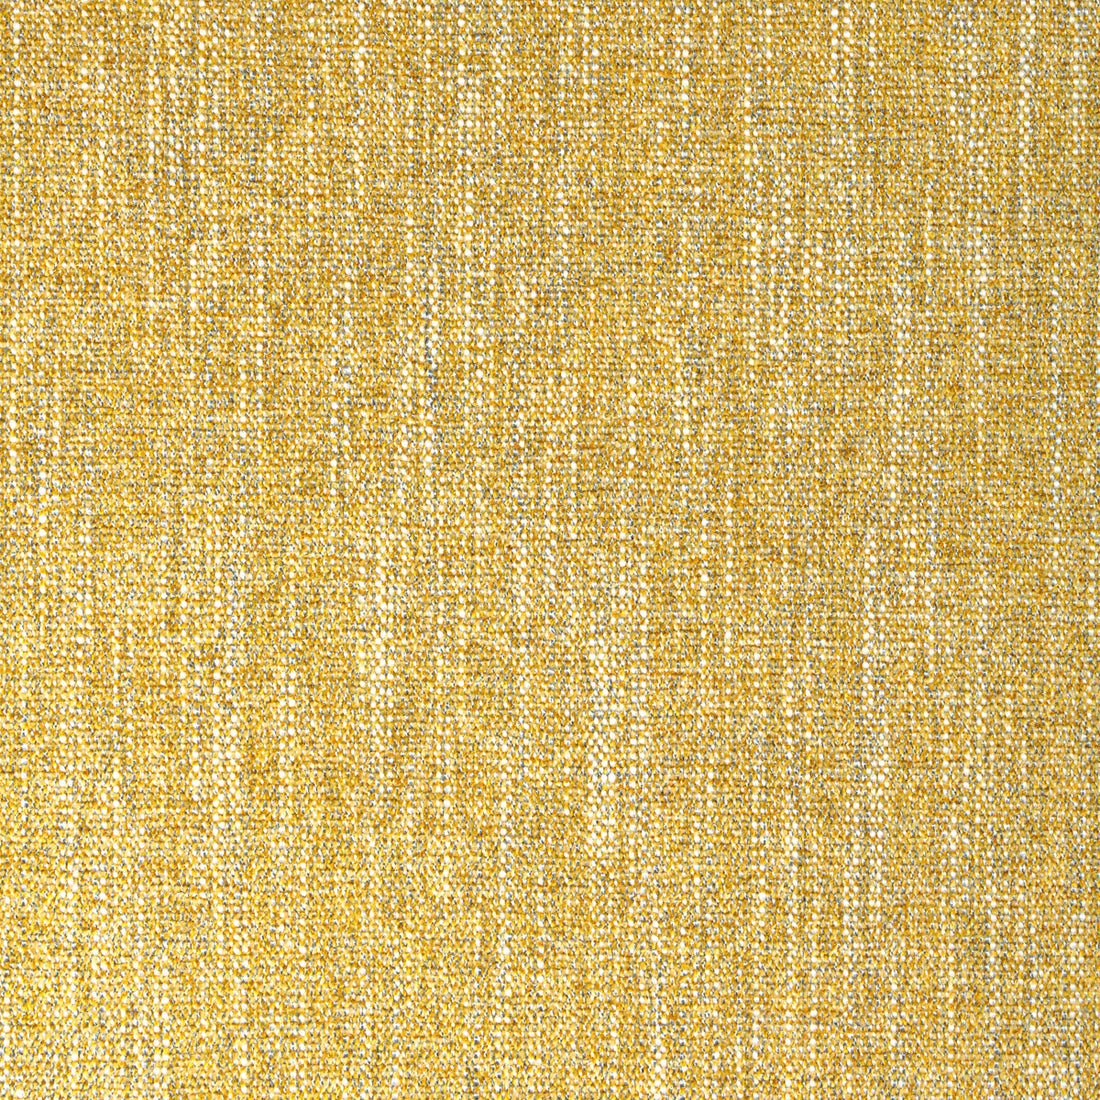 Marnie fabric in goldenrod color - pattern 36747.4.0 - by Kravet Contract